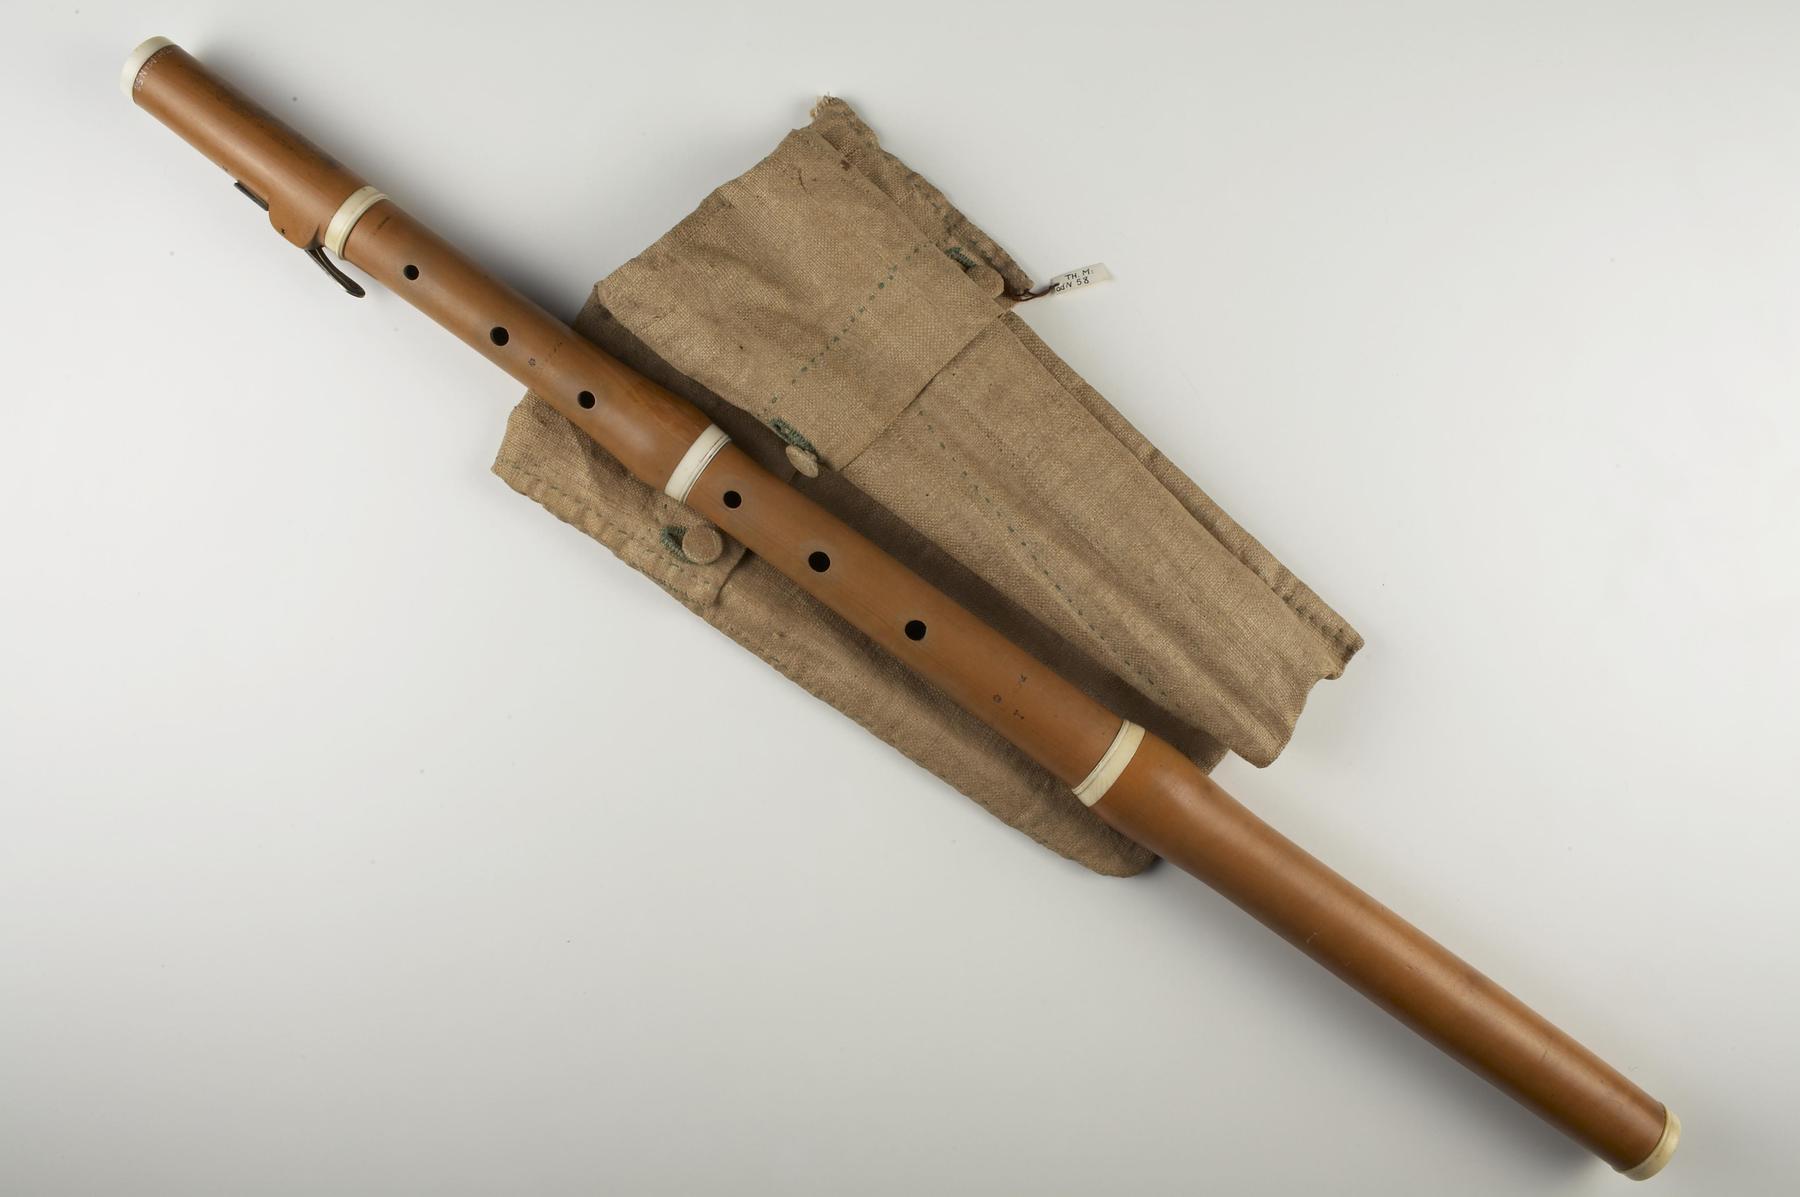 Baroque flute (flauto traverso) with canvas sleeve, N58